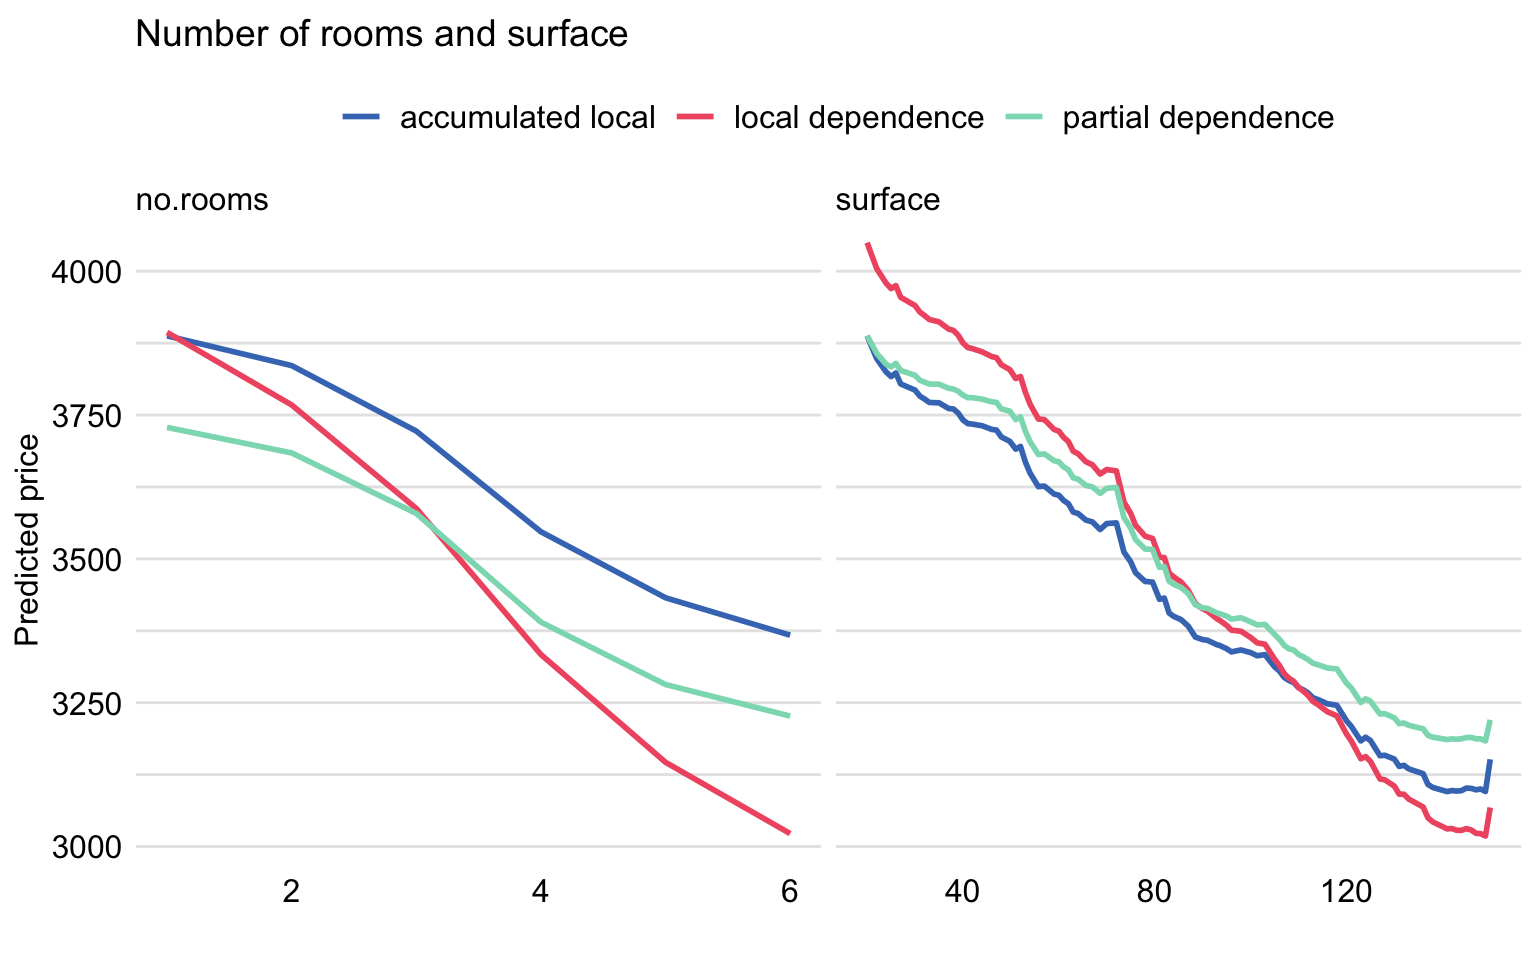 Partial-dependence, local-dependence, and accumulated-local profiles for the random forest model for the apartment-prices dataset.